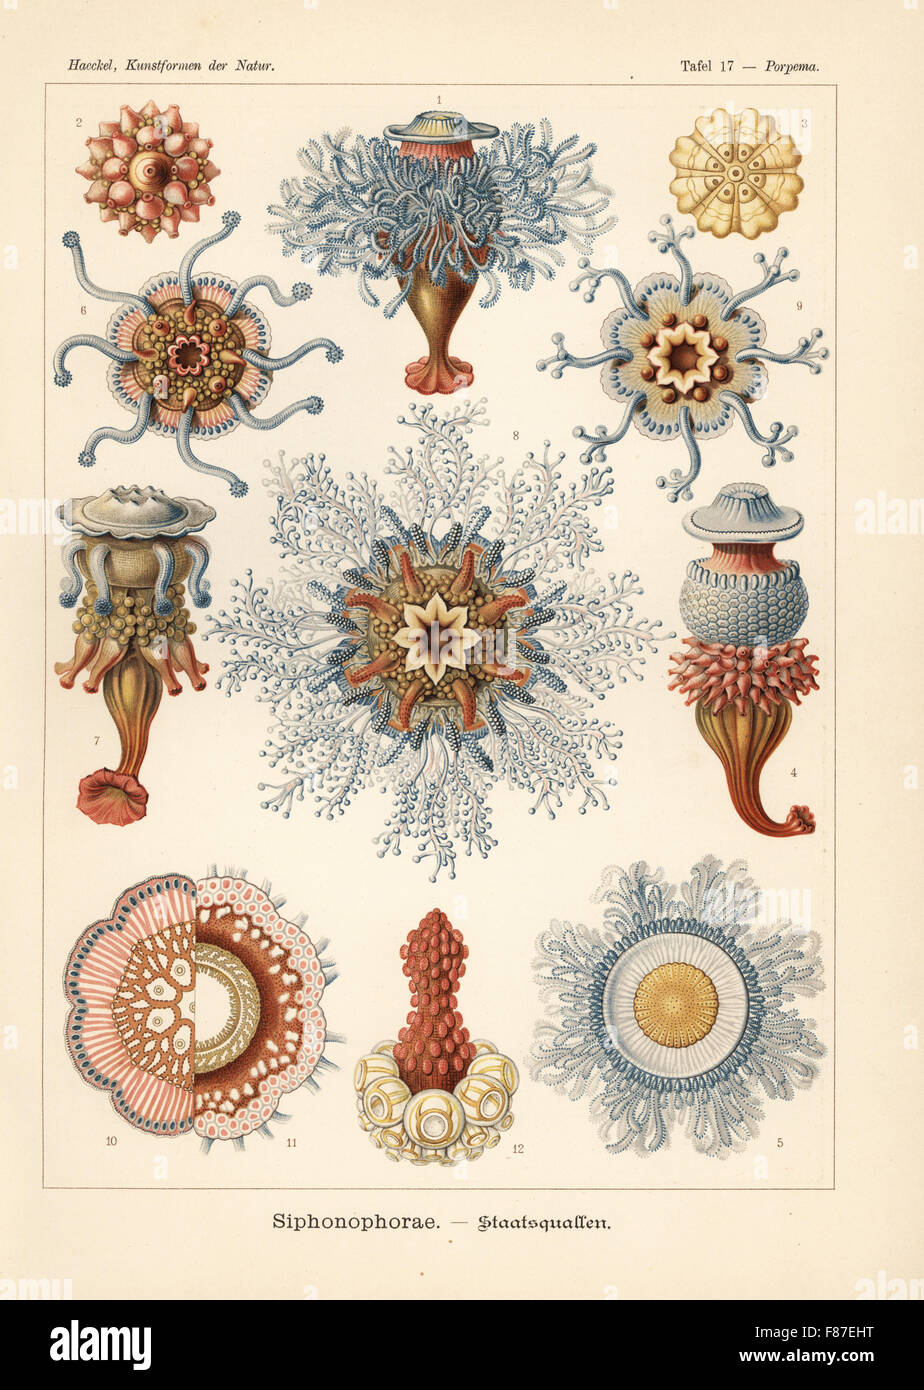 Siphonophorae hydrozoa: Porpema prunella and Porpita species, young and adult colonies, gas bladder, etc. Chromolithograph by Adolf Glitsch from an illustration by Ernst Haeckel from Art Forms in Nature, Kunstformen der Natur, Liepzig, Germany, 1904. Stock Photo